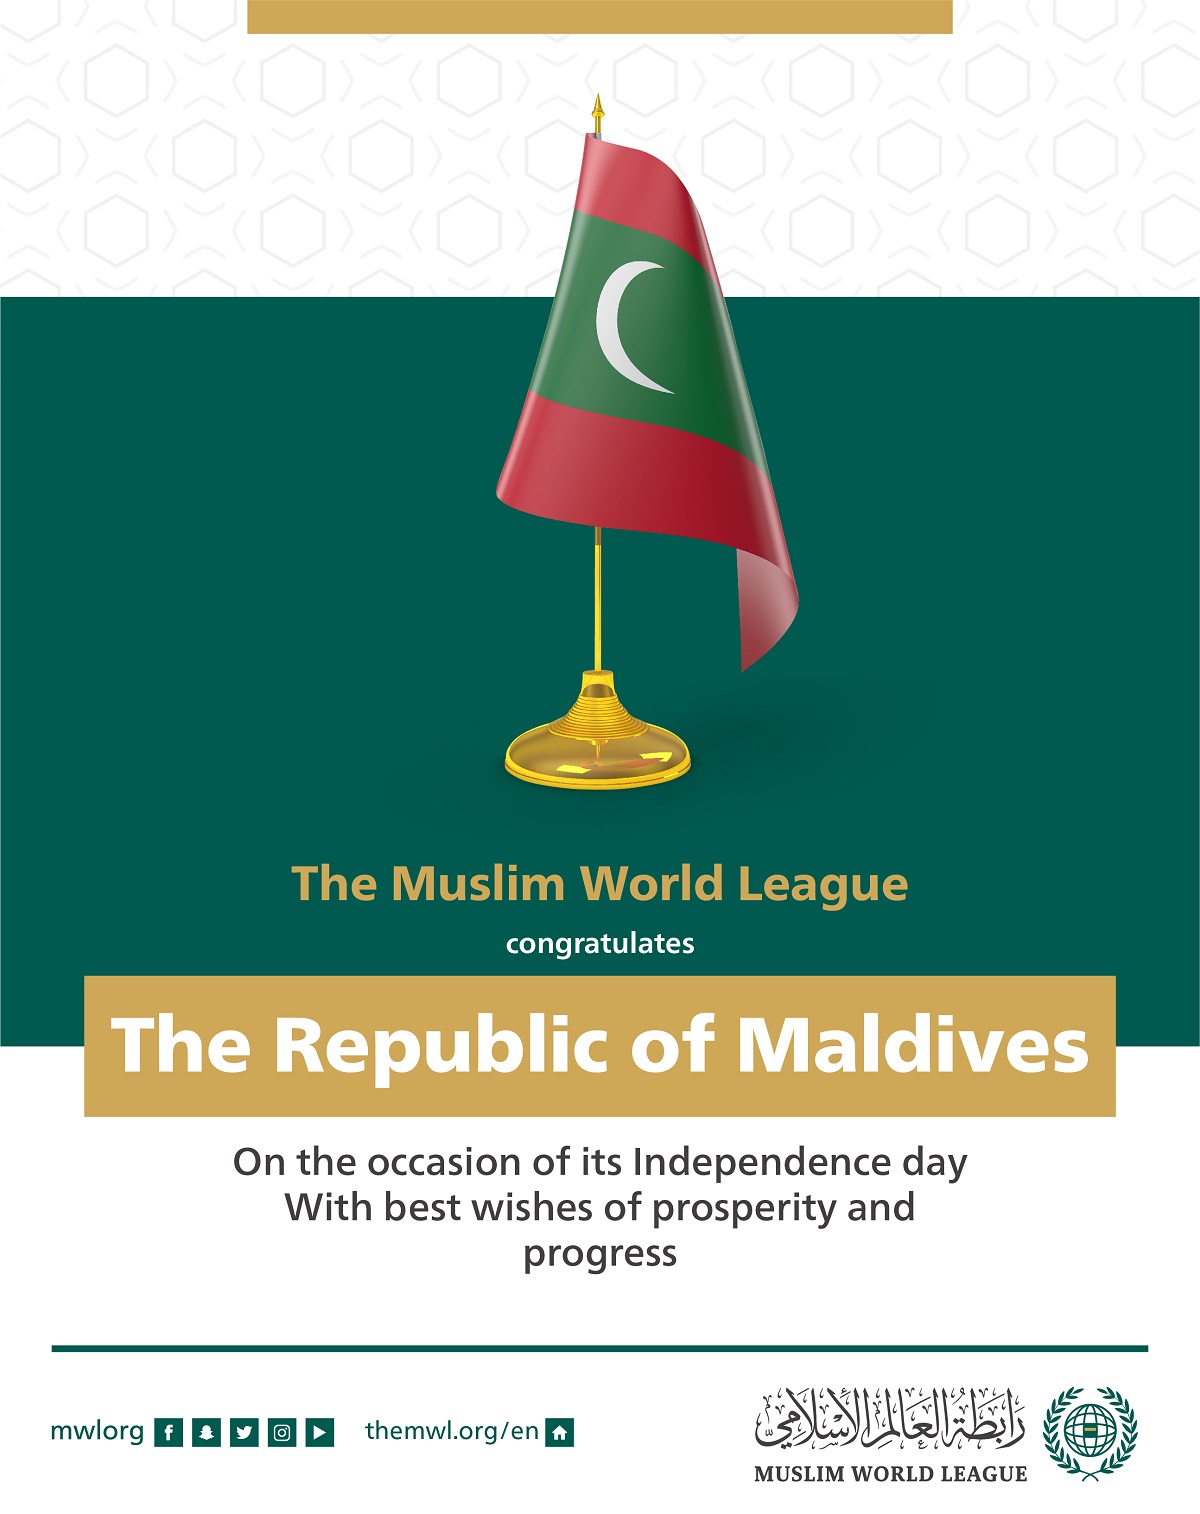 The Muslim World League congratulates the Republic of Maldives on its National Day